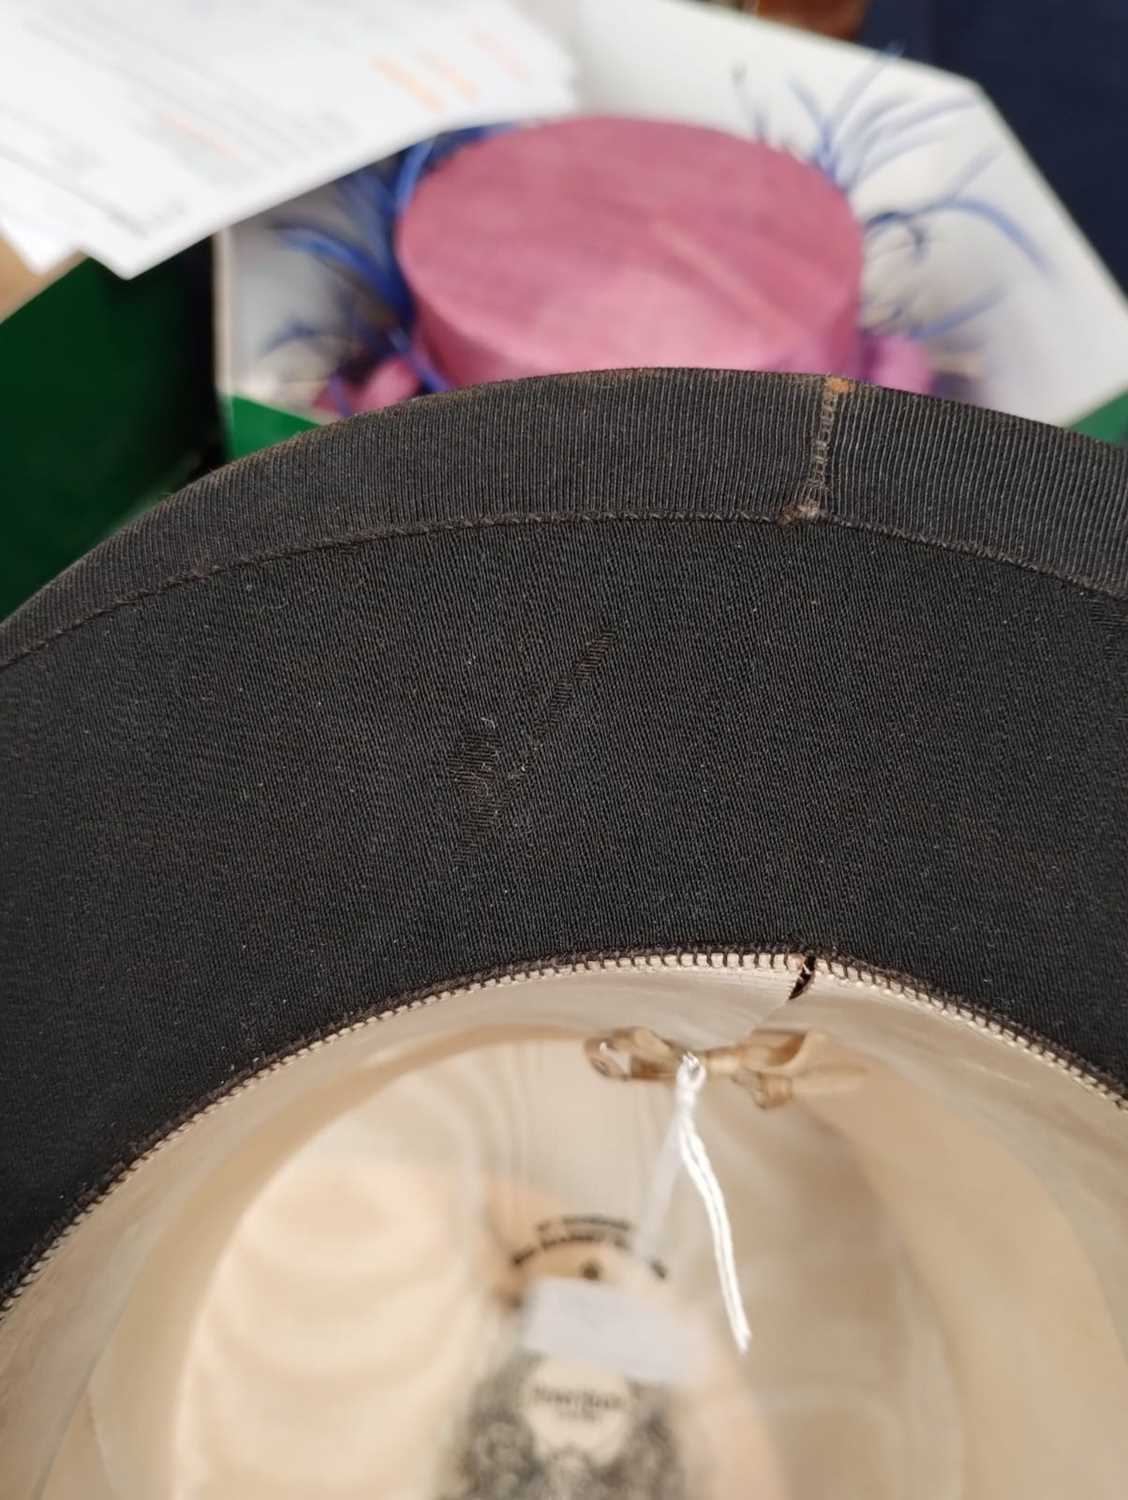 Henry Heath London Black Silk Top Hat in a fitted leather case with red cotton lining, Another in - Image 6 of 28